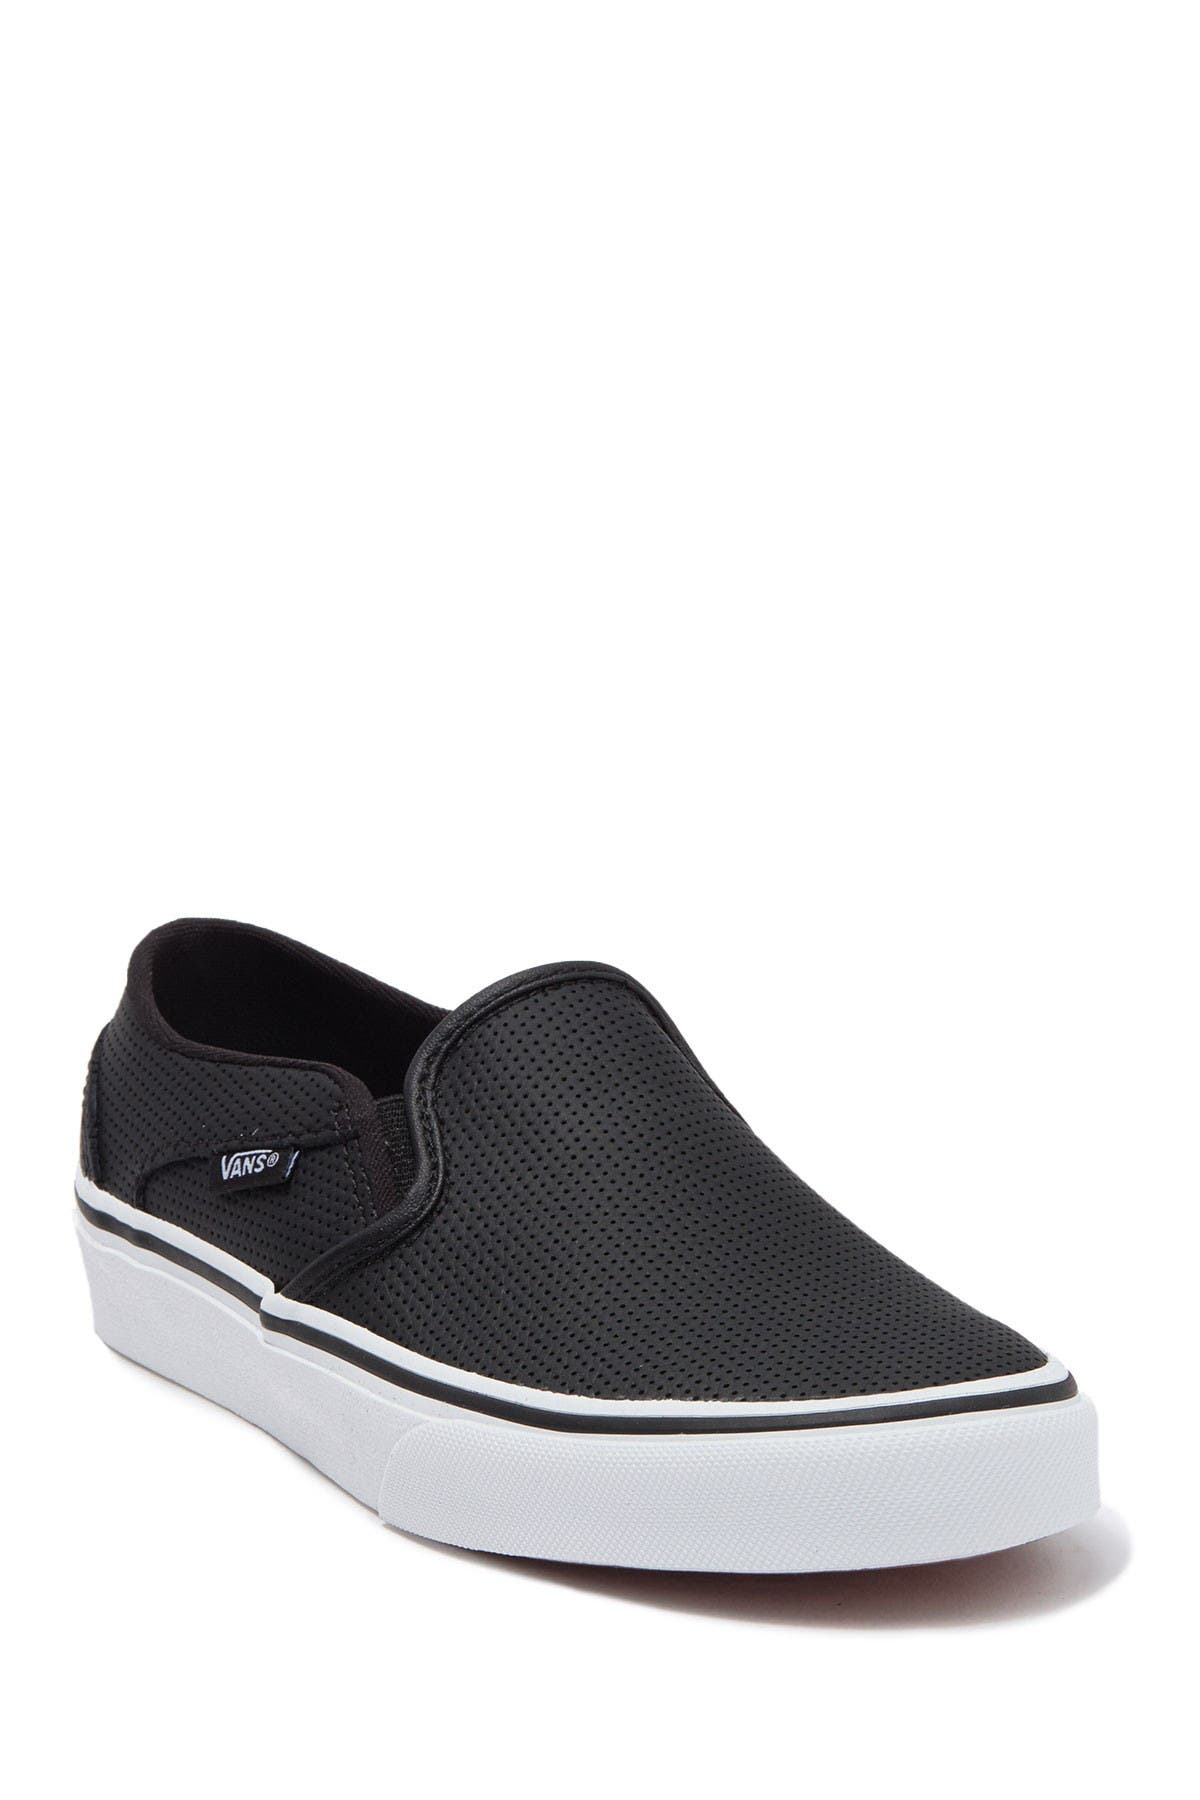 vans asher perforated